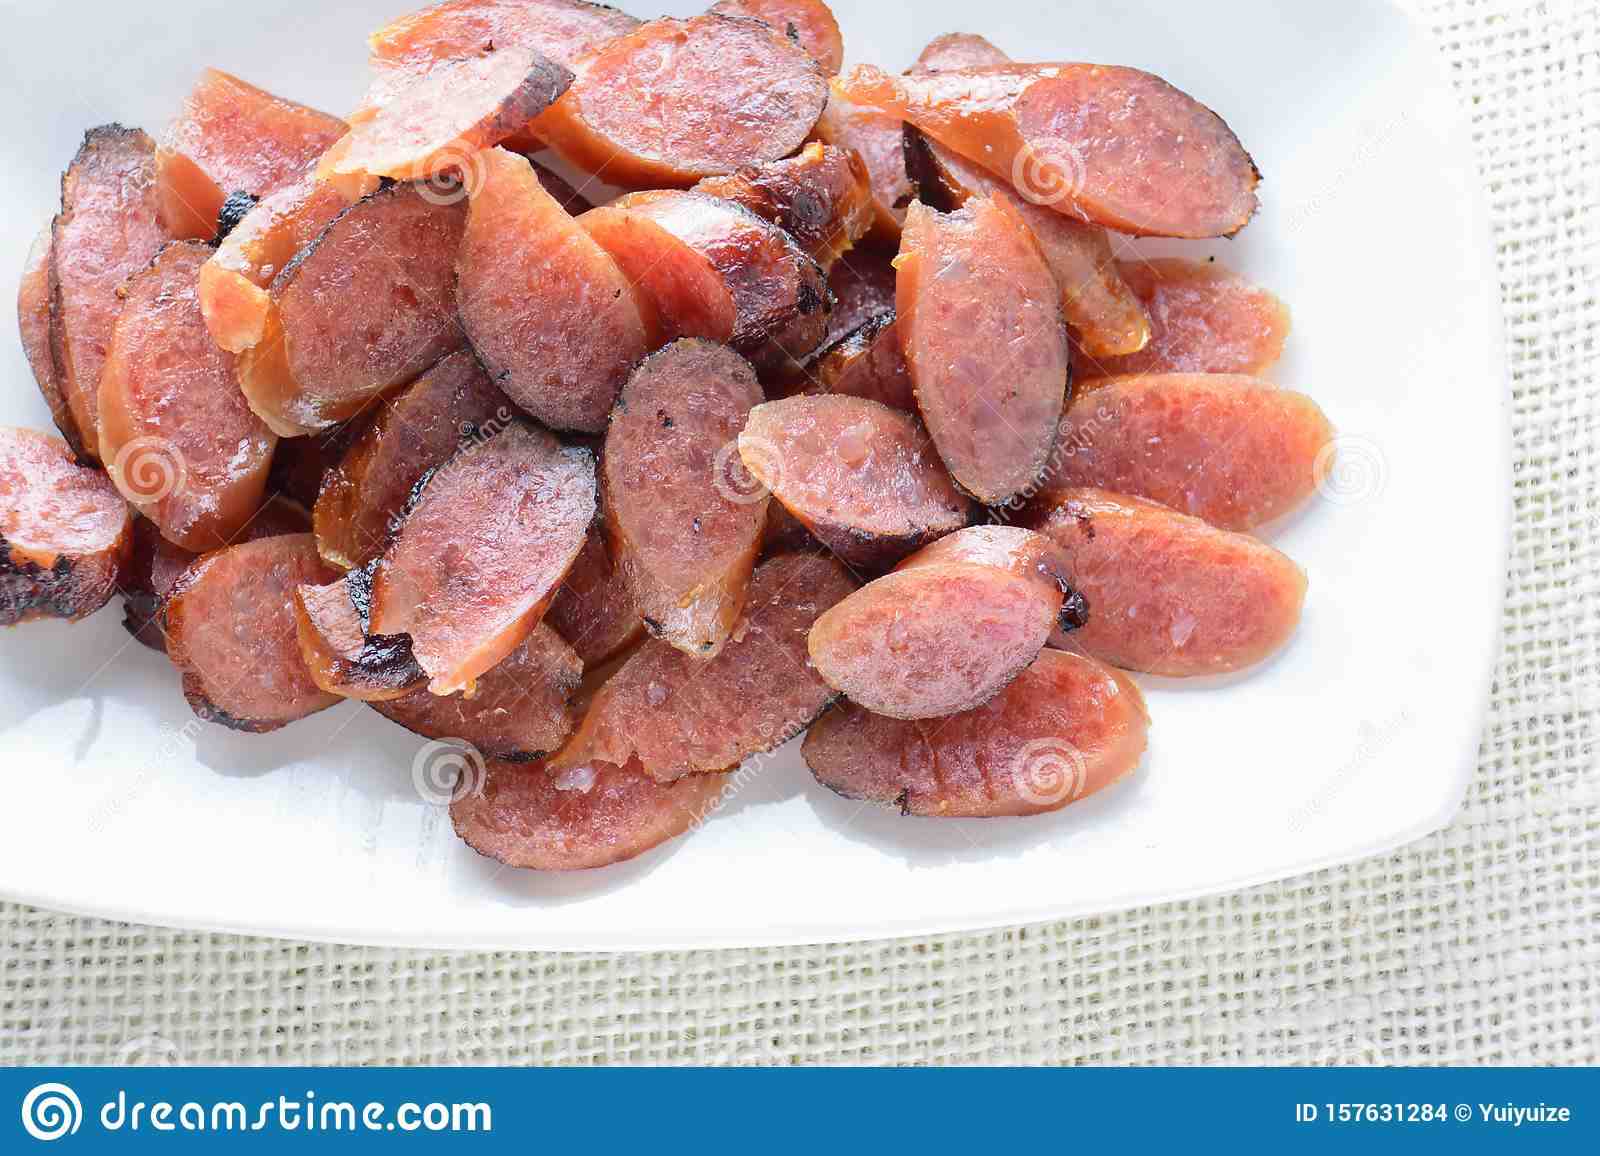 Do you have to steam Chinese sausage?